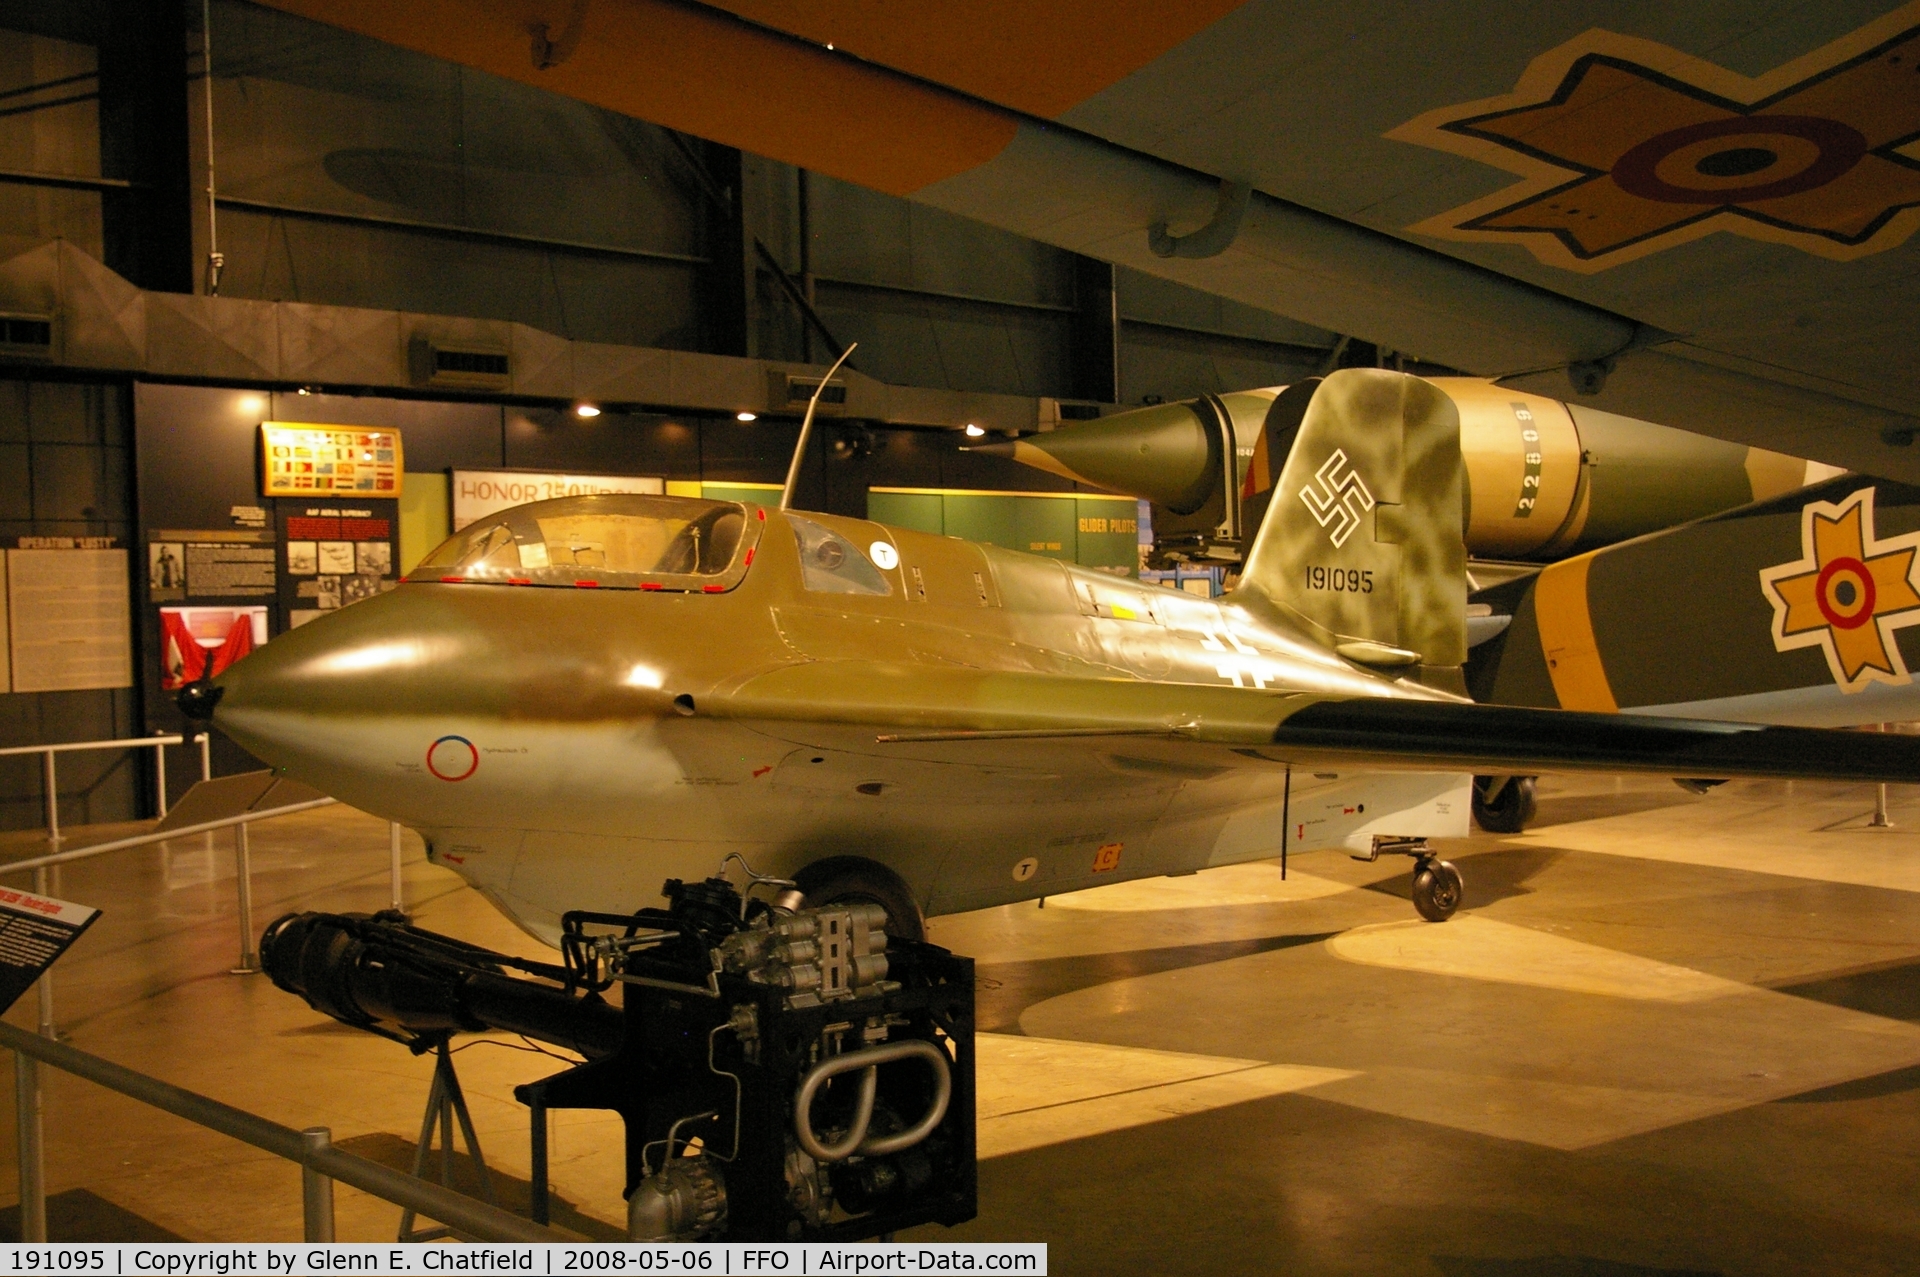 191095, Messerschmitt Me-163B Komet C/N Not found 191095, Displayed at the National Museum of the U.S. Air Force